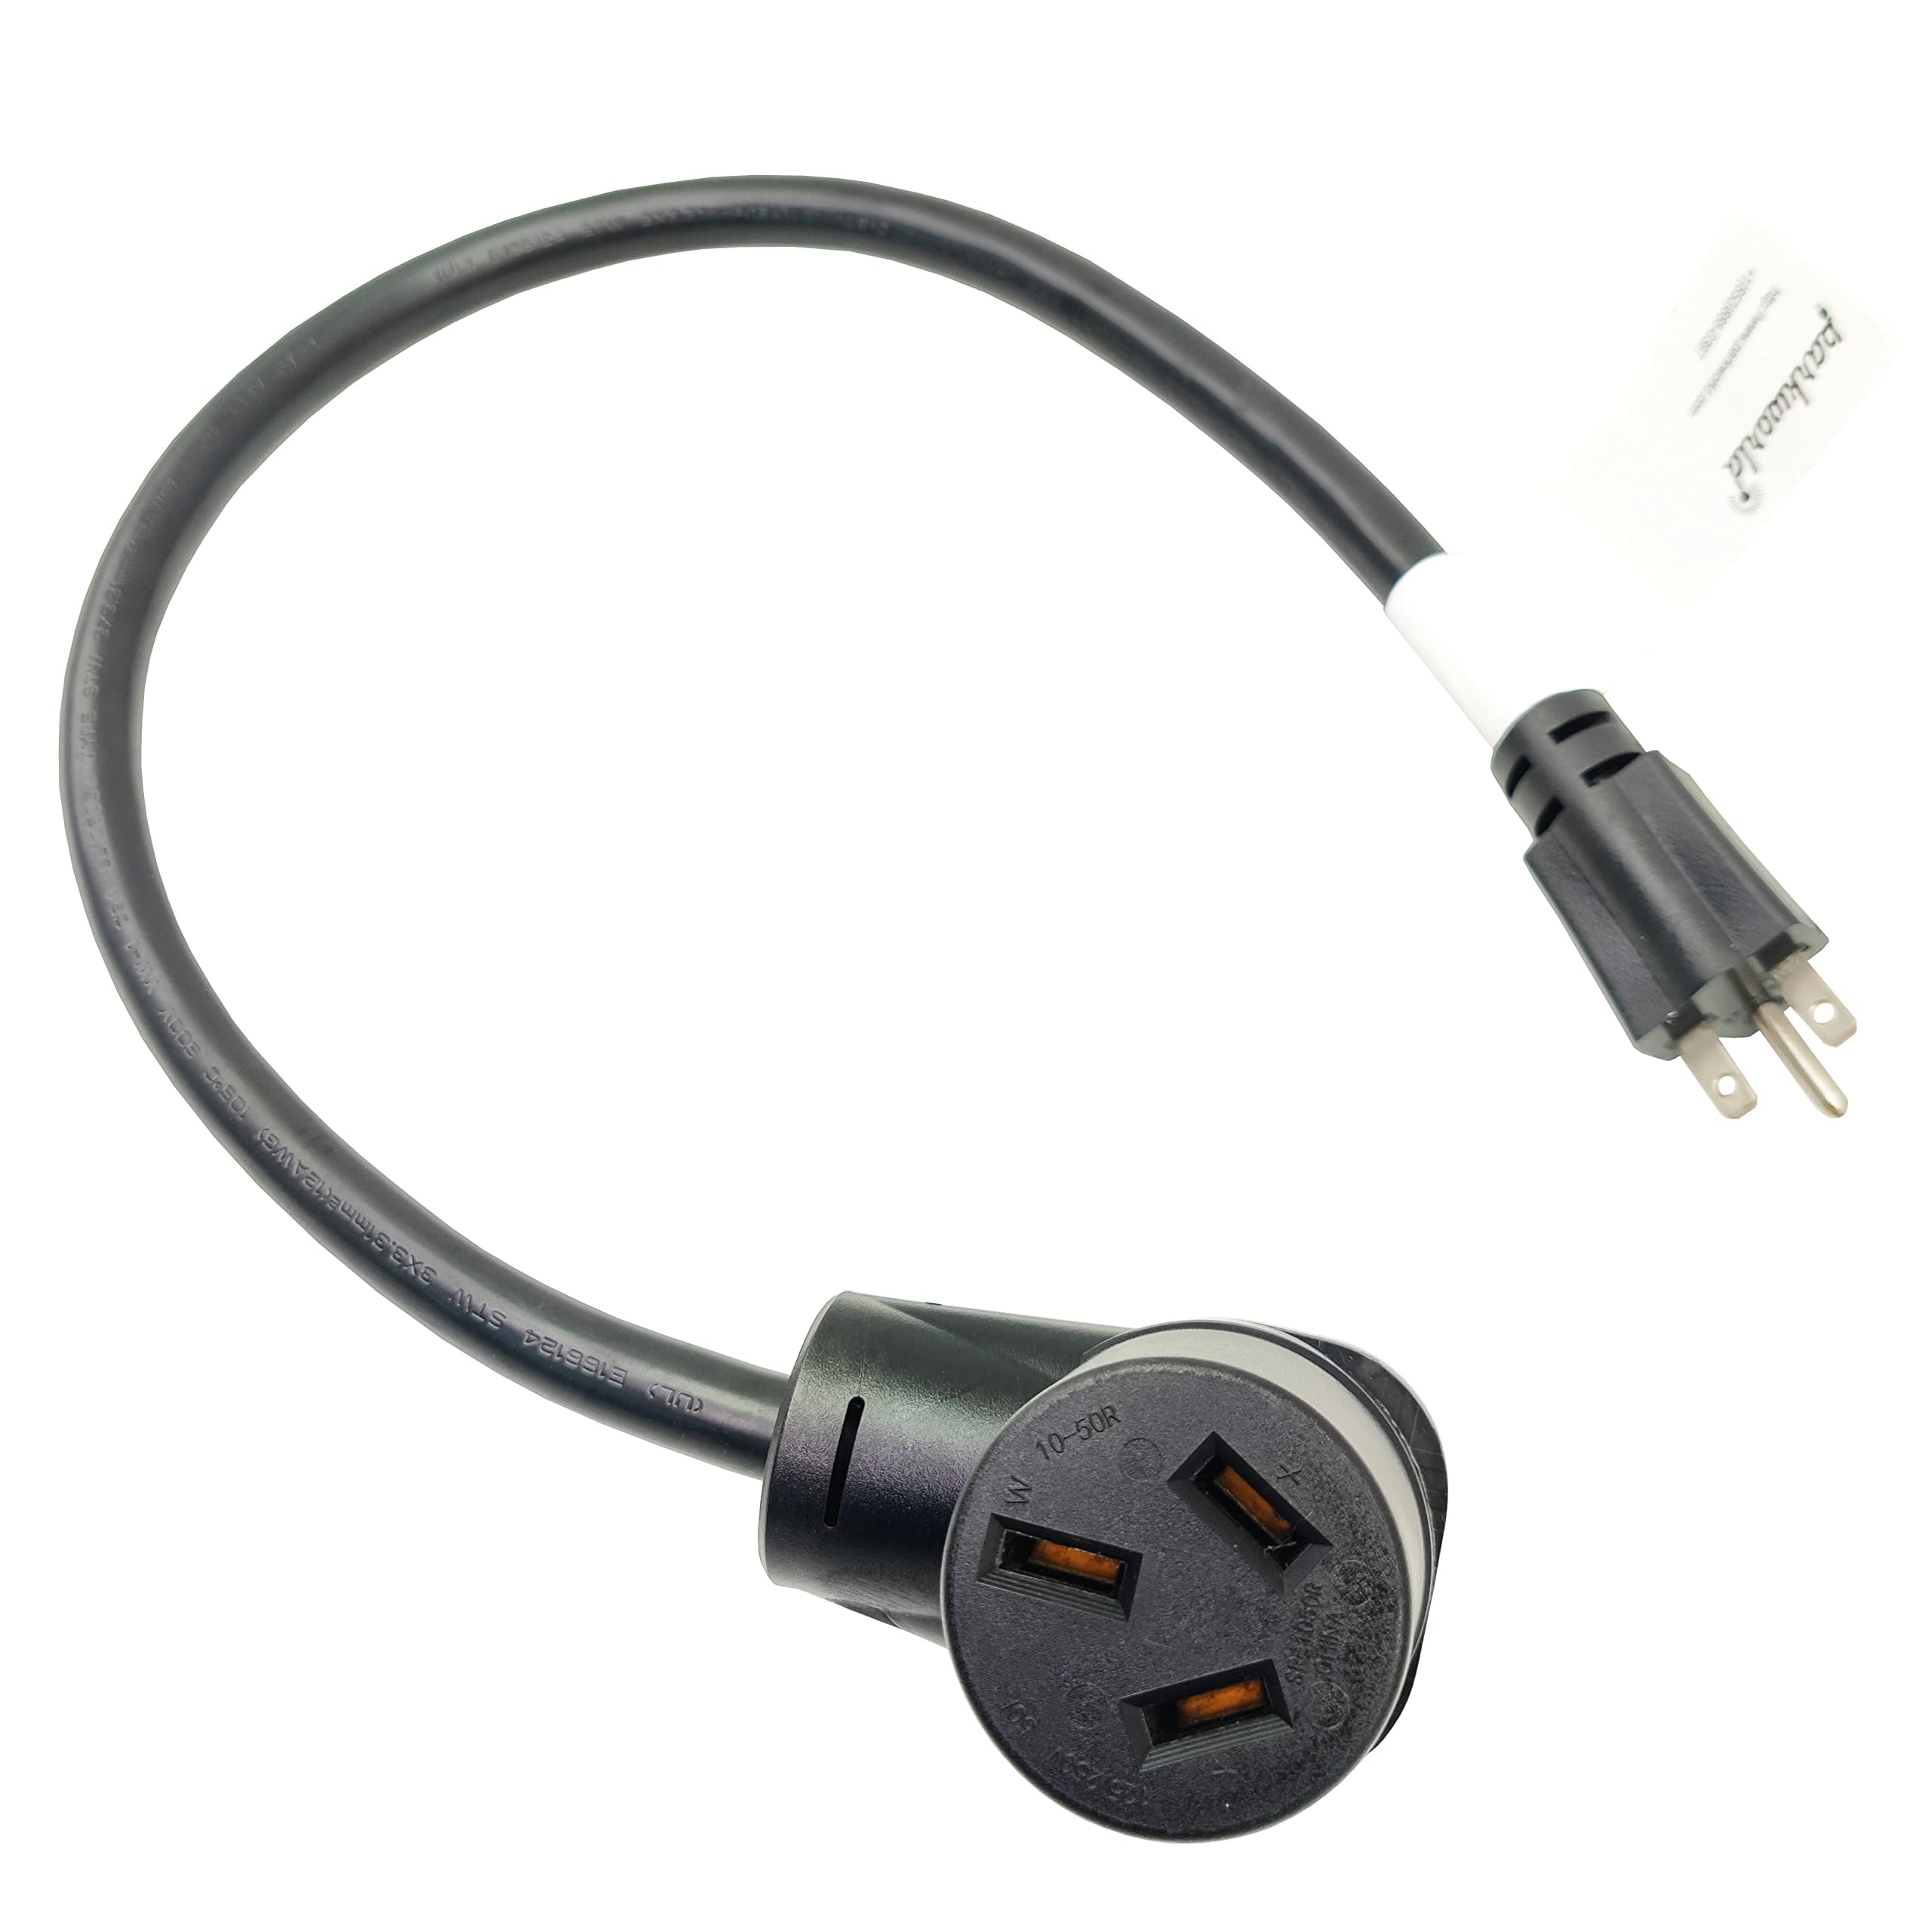 Parkworld 61643A Adapter Cord A/C 3 Prong Plug 6-15P to 10-50R Electric  Stove Receptacle, NEMA 6-15 Dryer Male to NEMA 10-50R Electrical Stove  Female, 